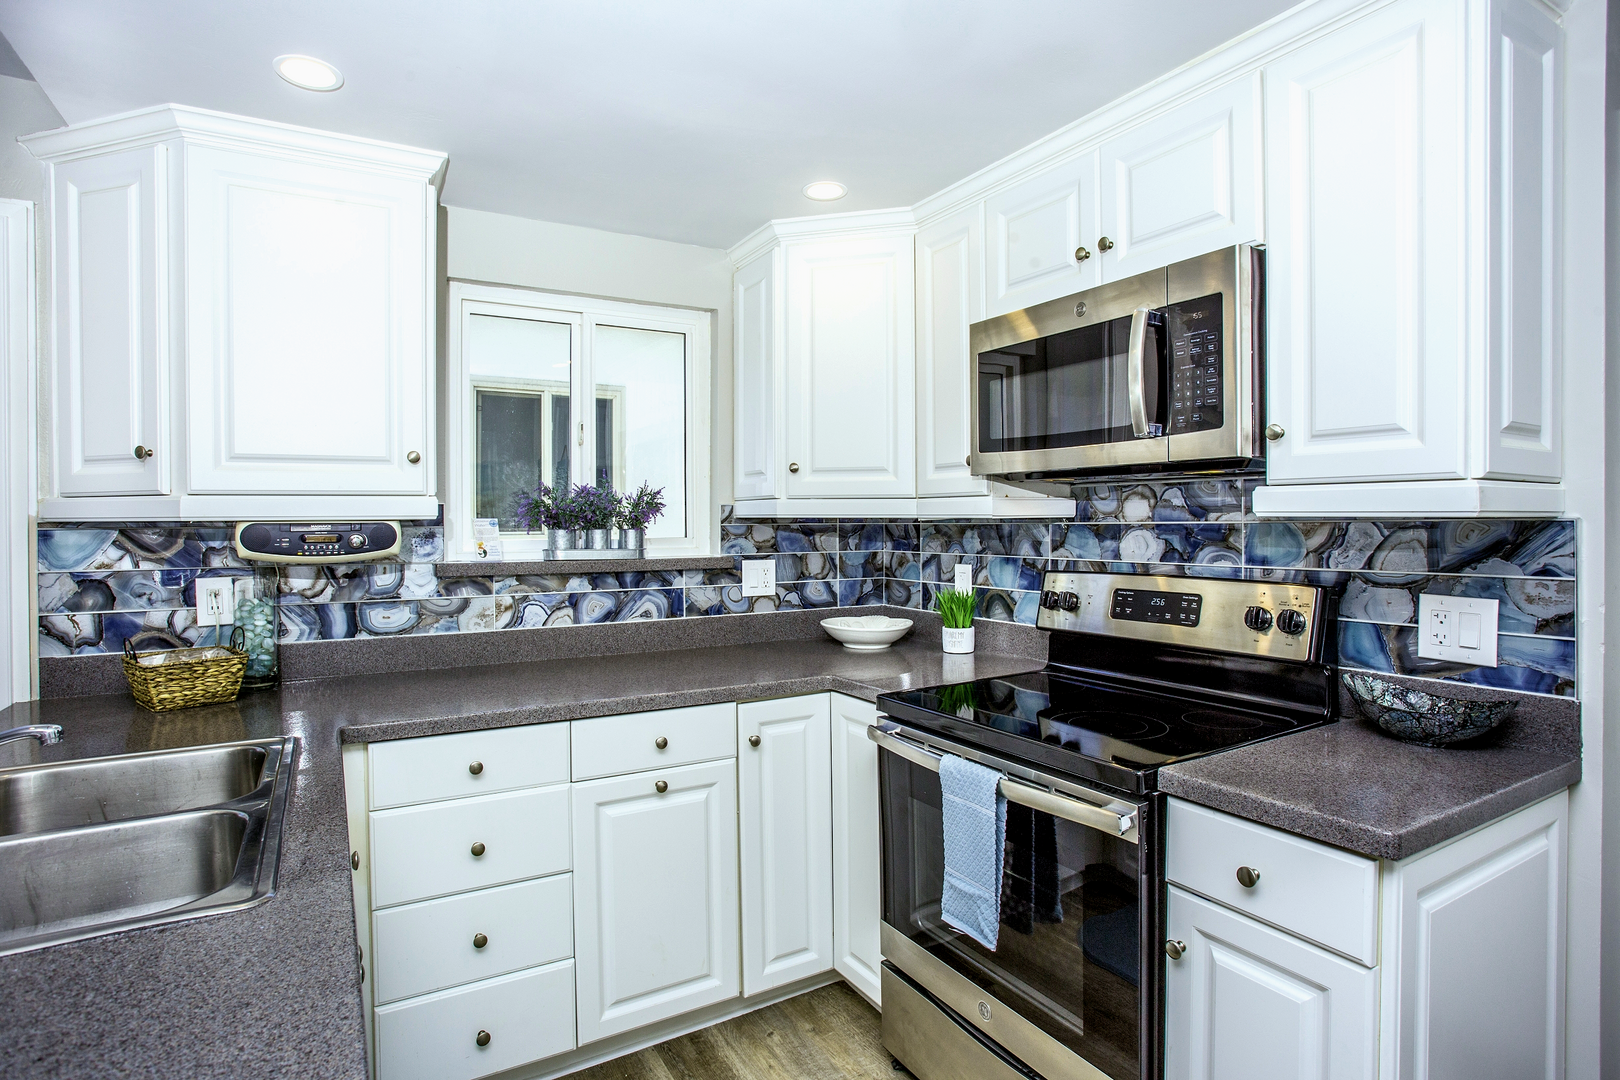 Newly remodeled kitchen with stainless steel appliances, sink, toaster, blender, coffee maker